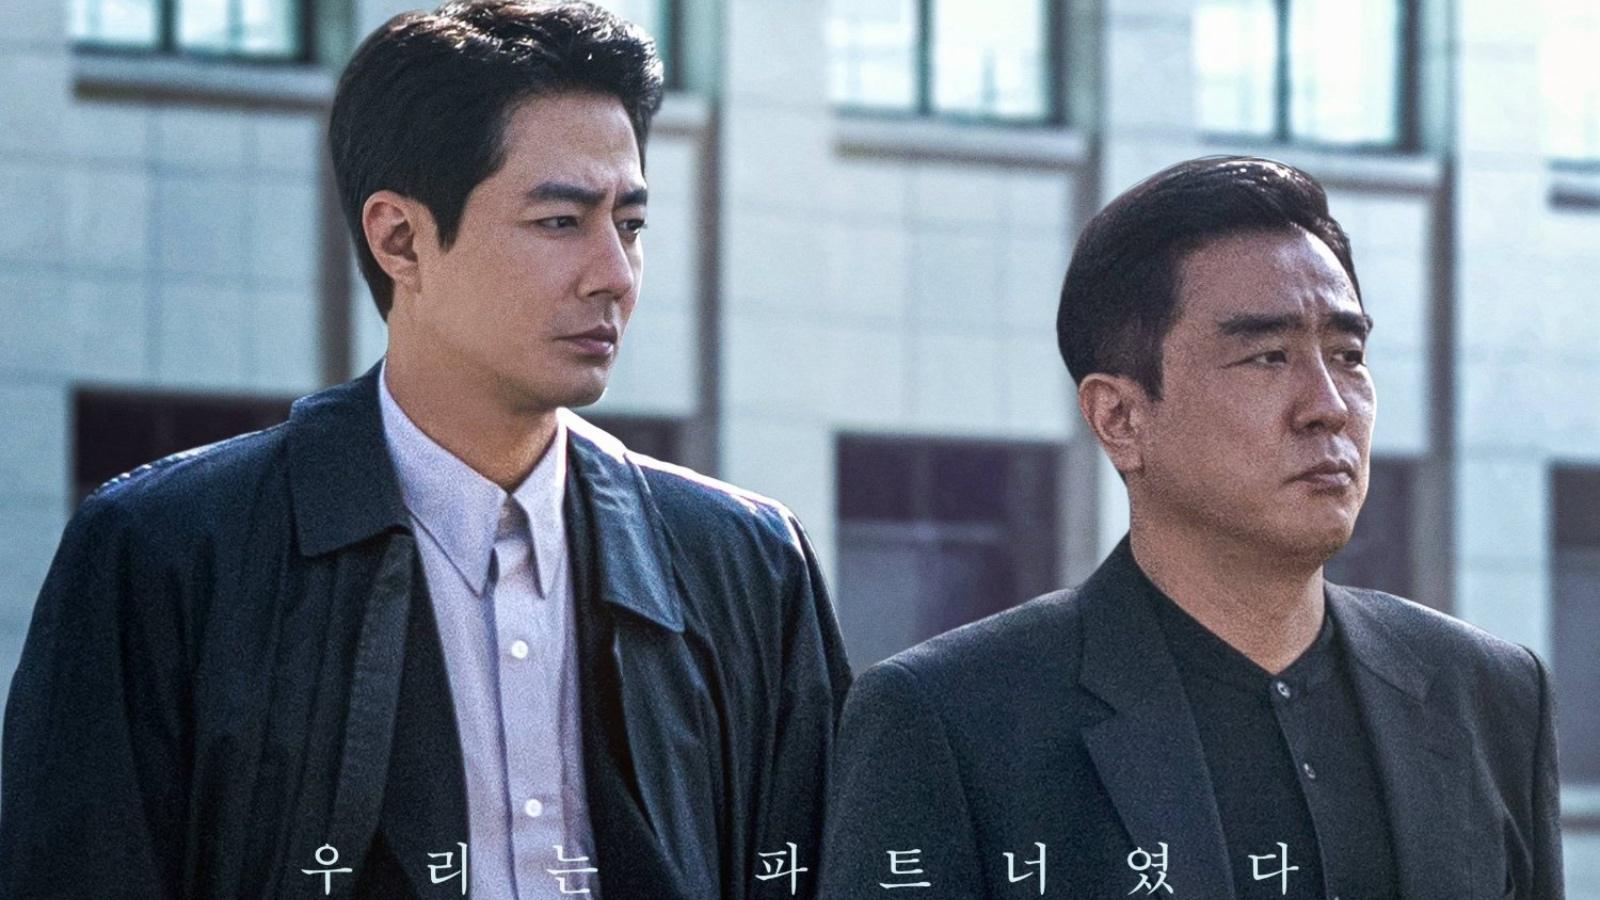 Jo In-sung and Ryu Seung-ryong star in the action thriller K-drama Moving